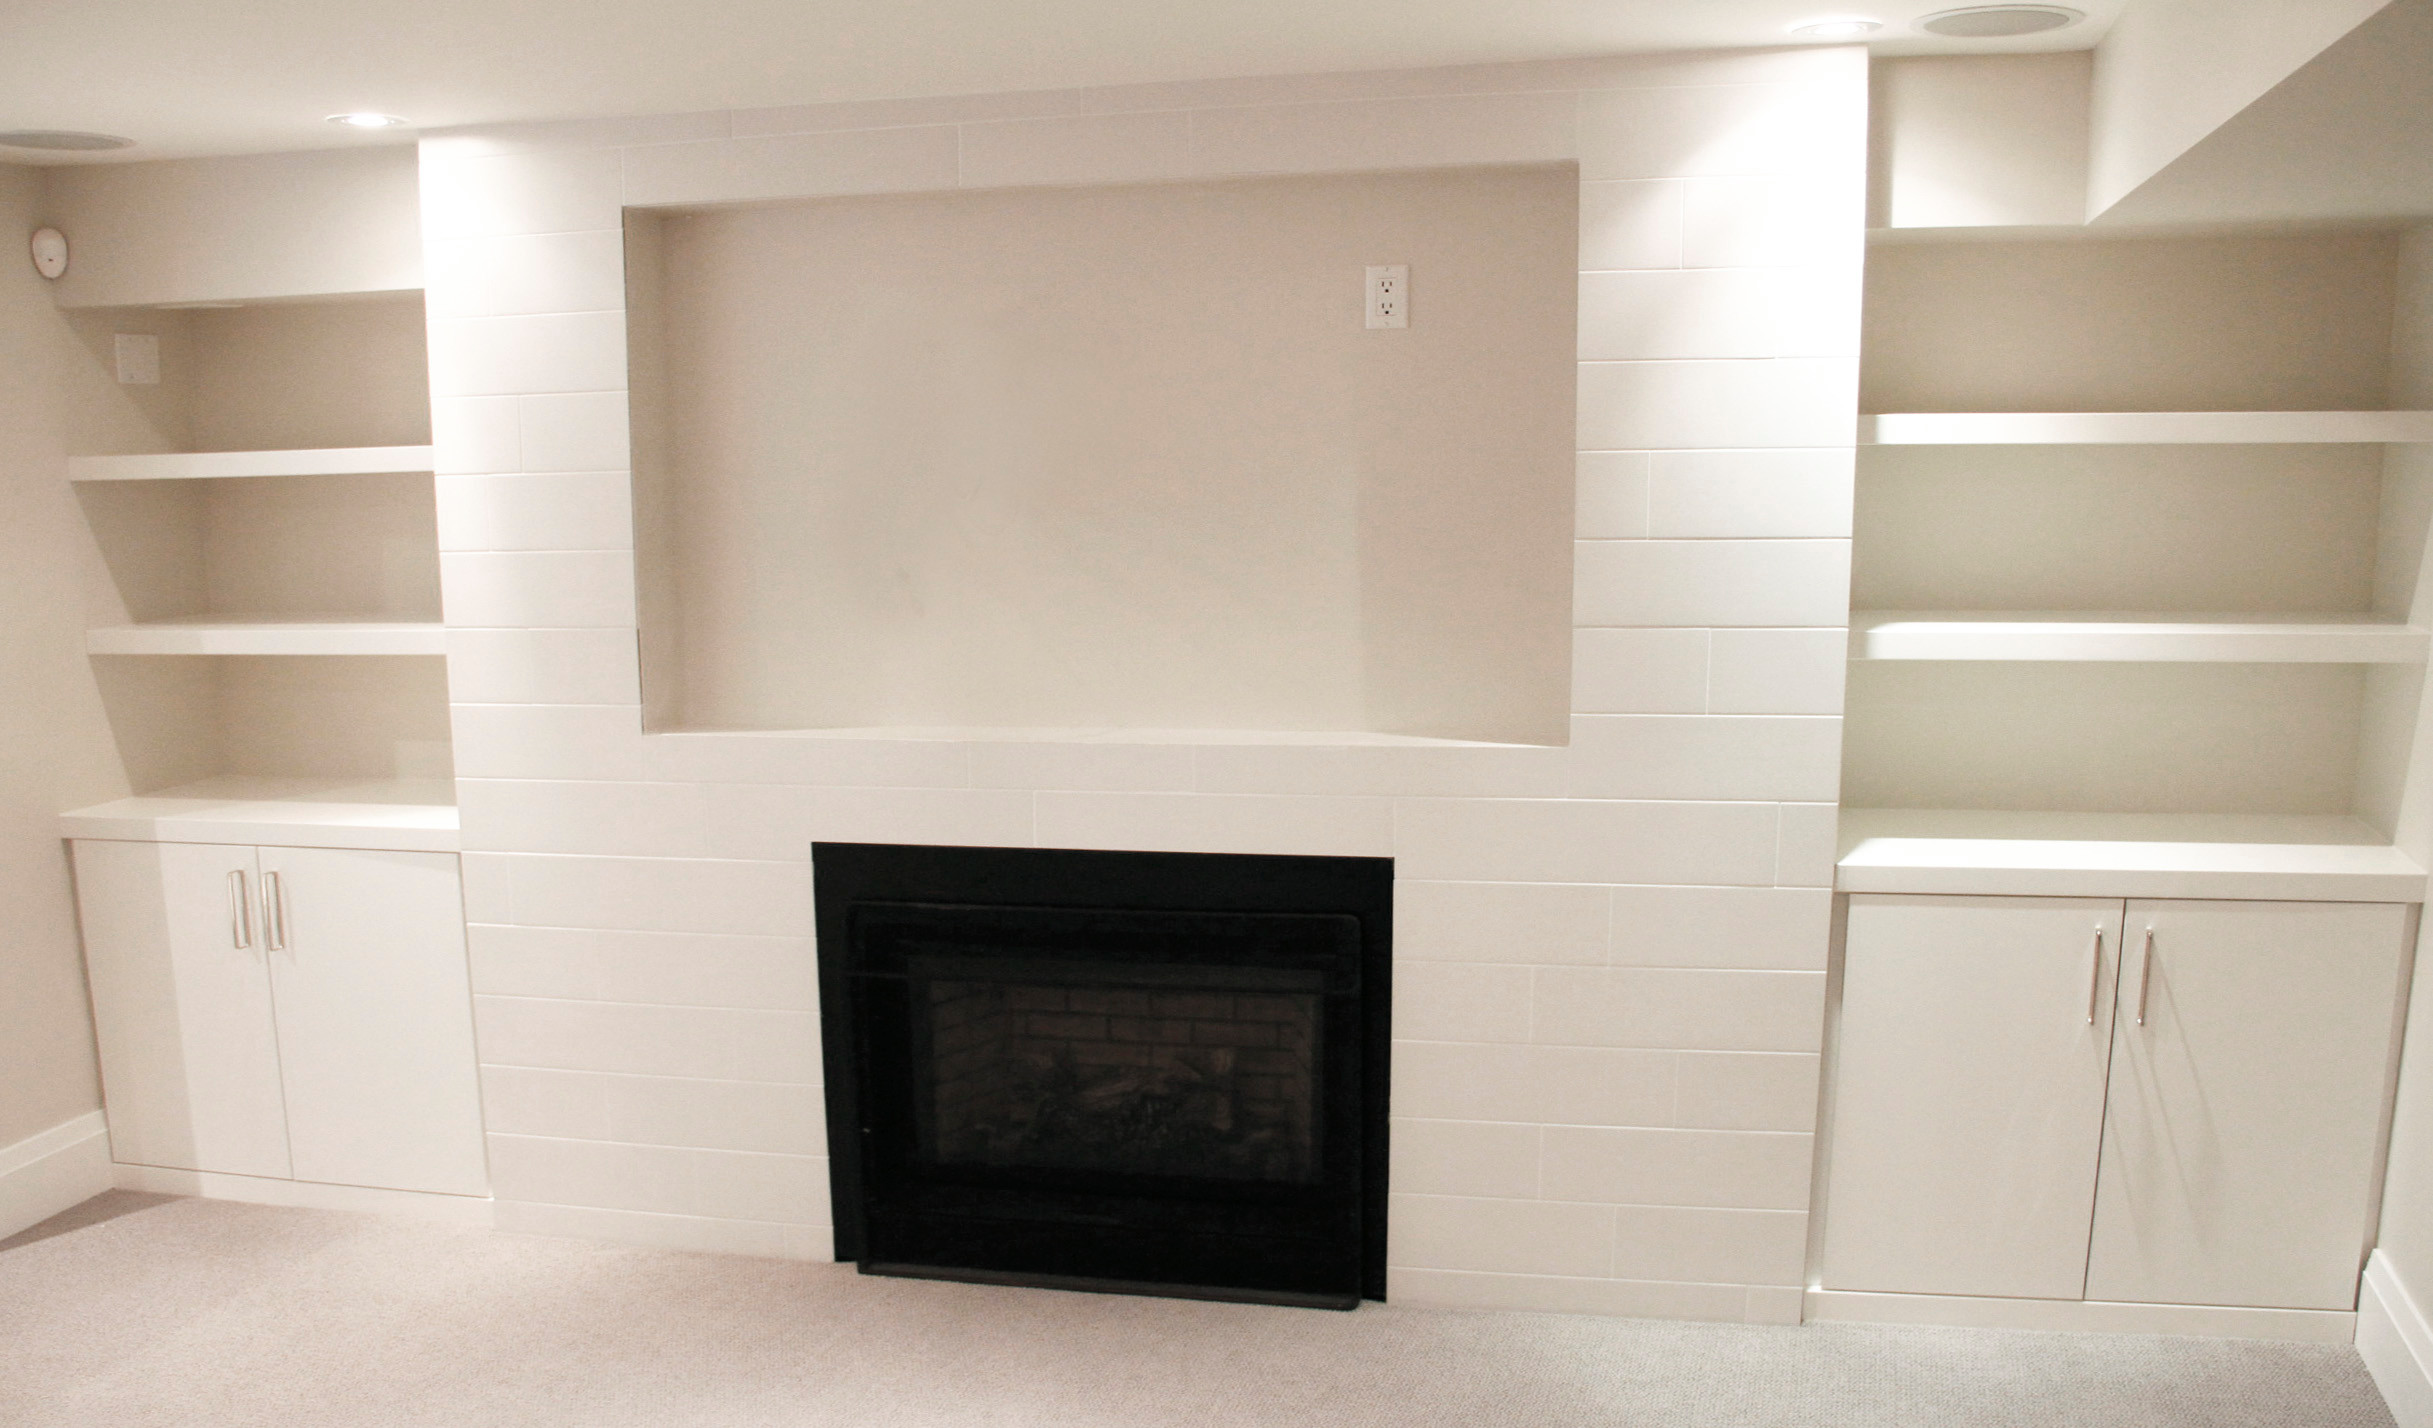 Basement/ Family Room Built-in Cabinetry and Banquette